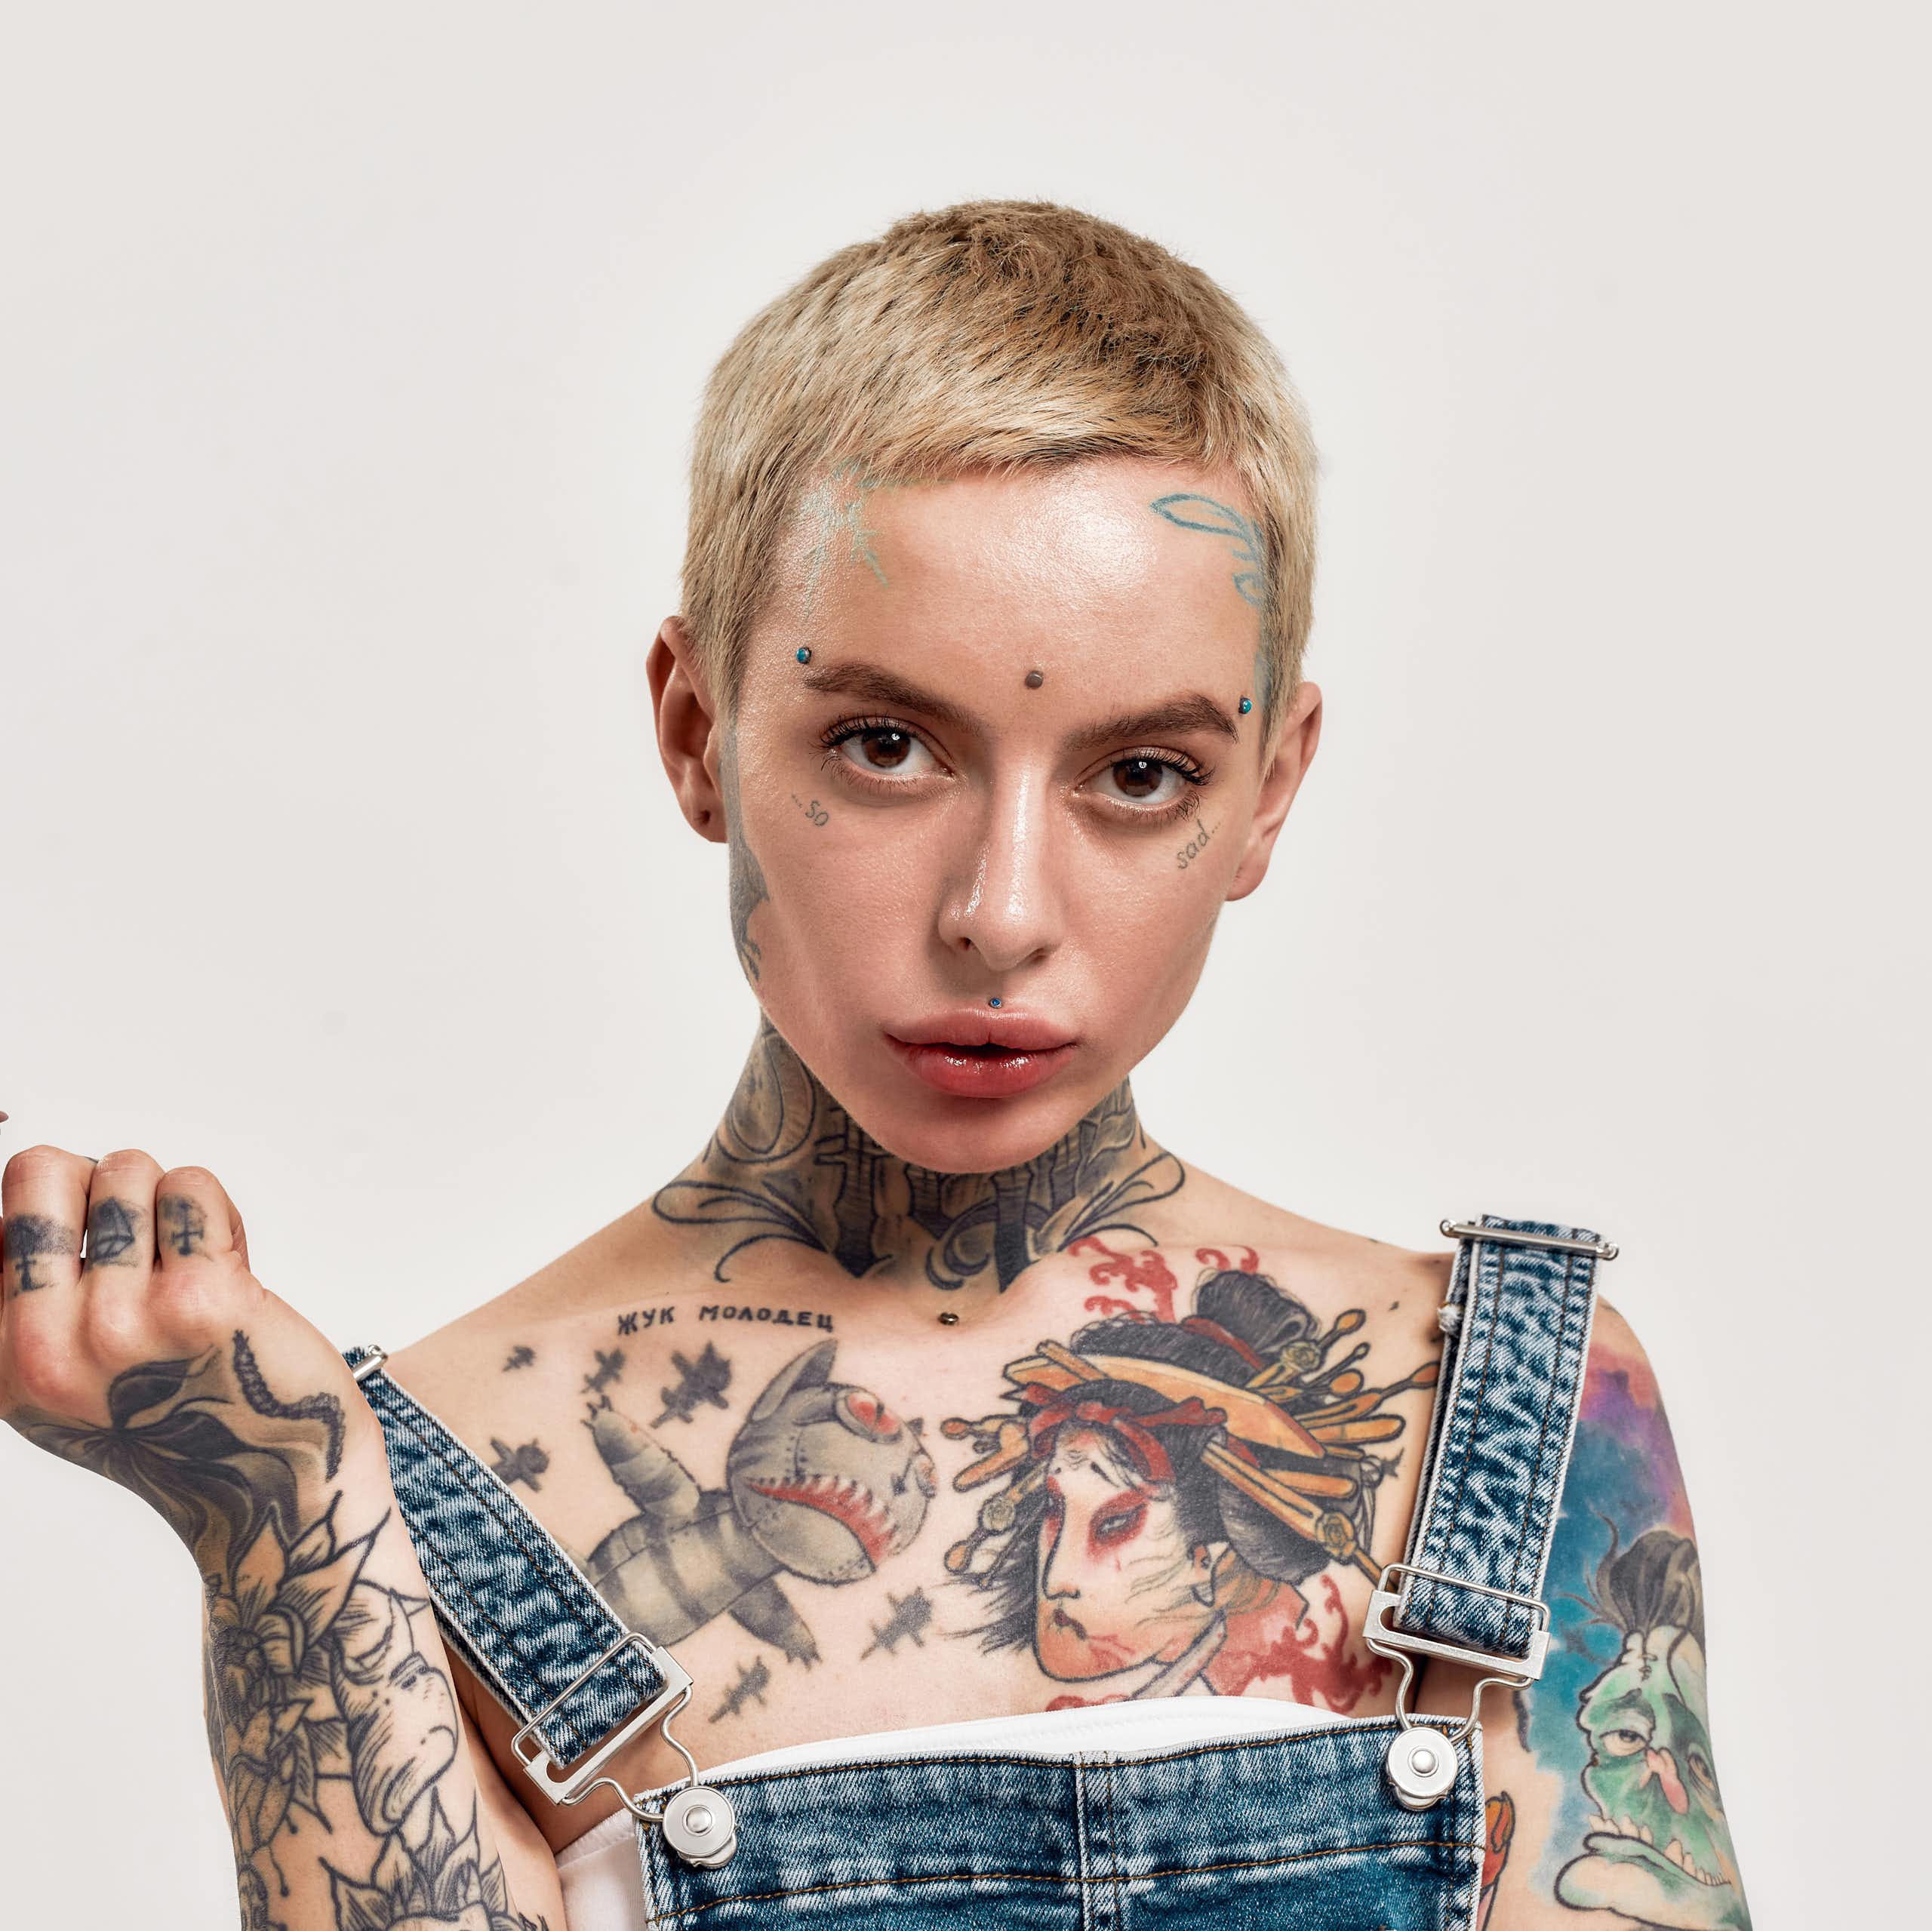 Woman with multiple tattoos